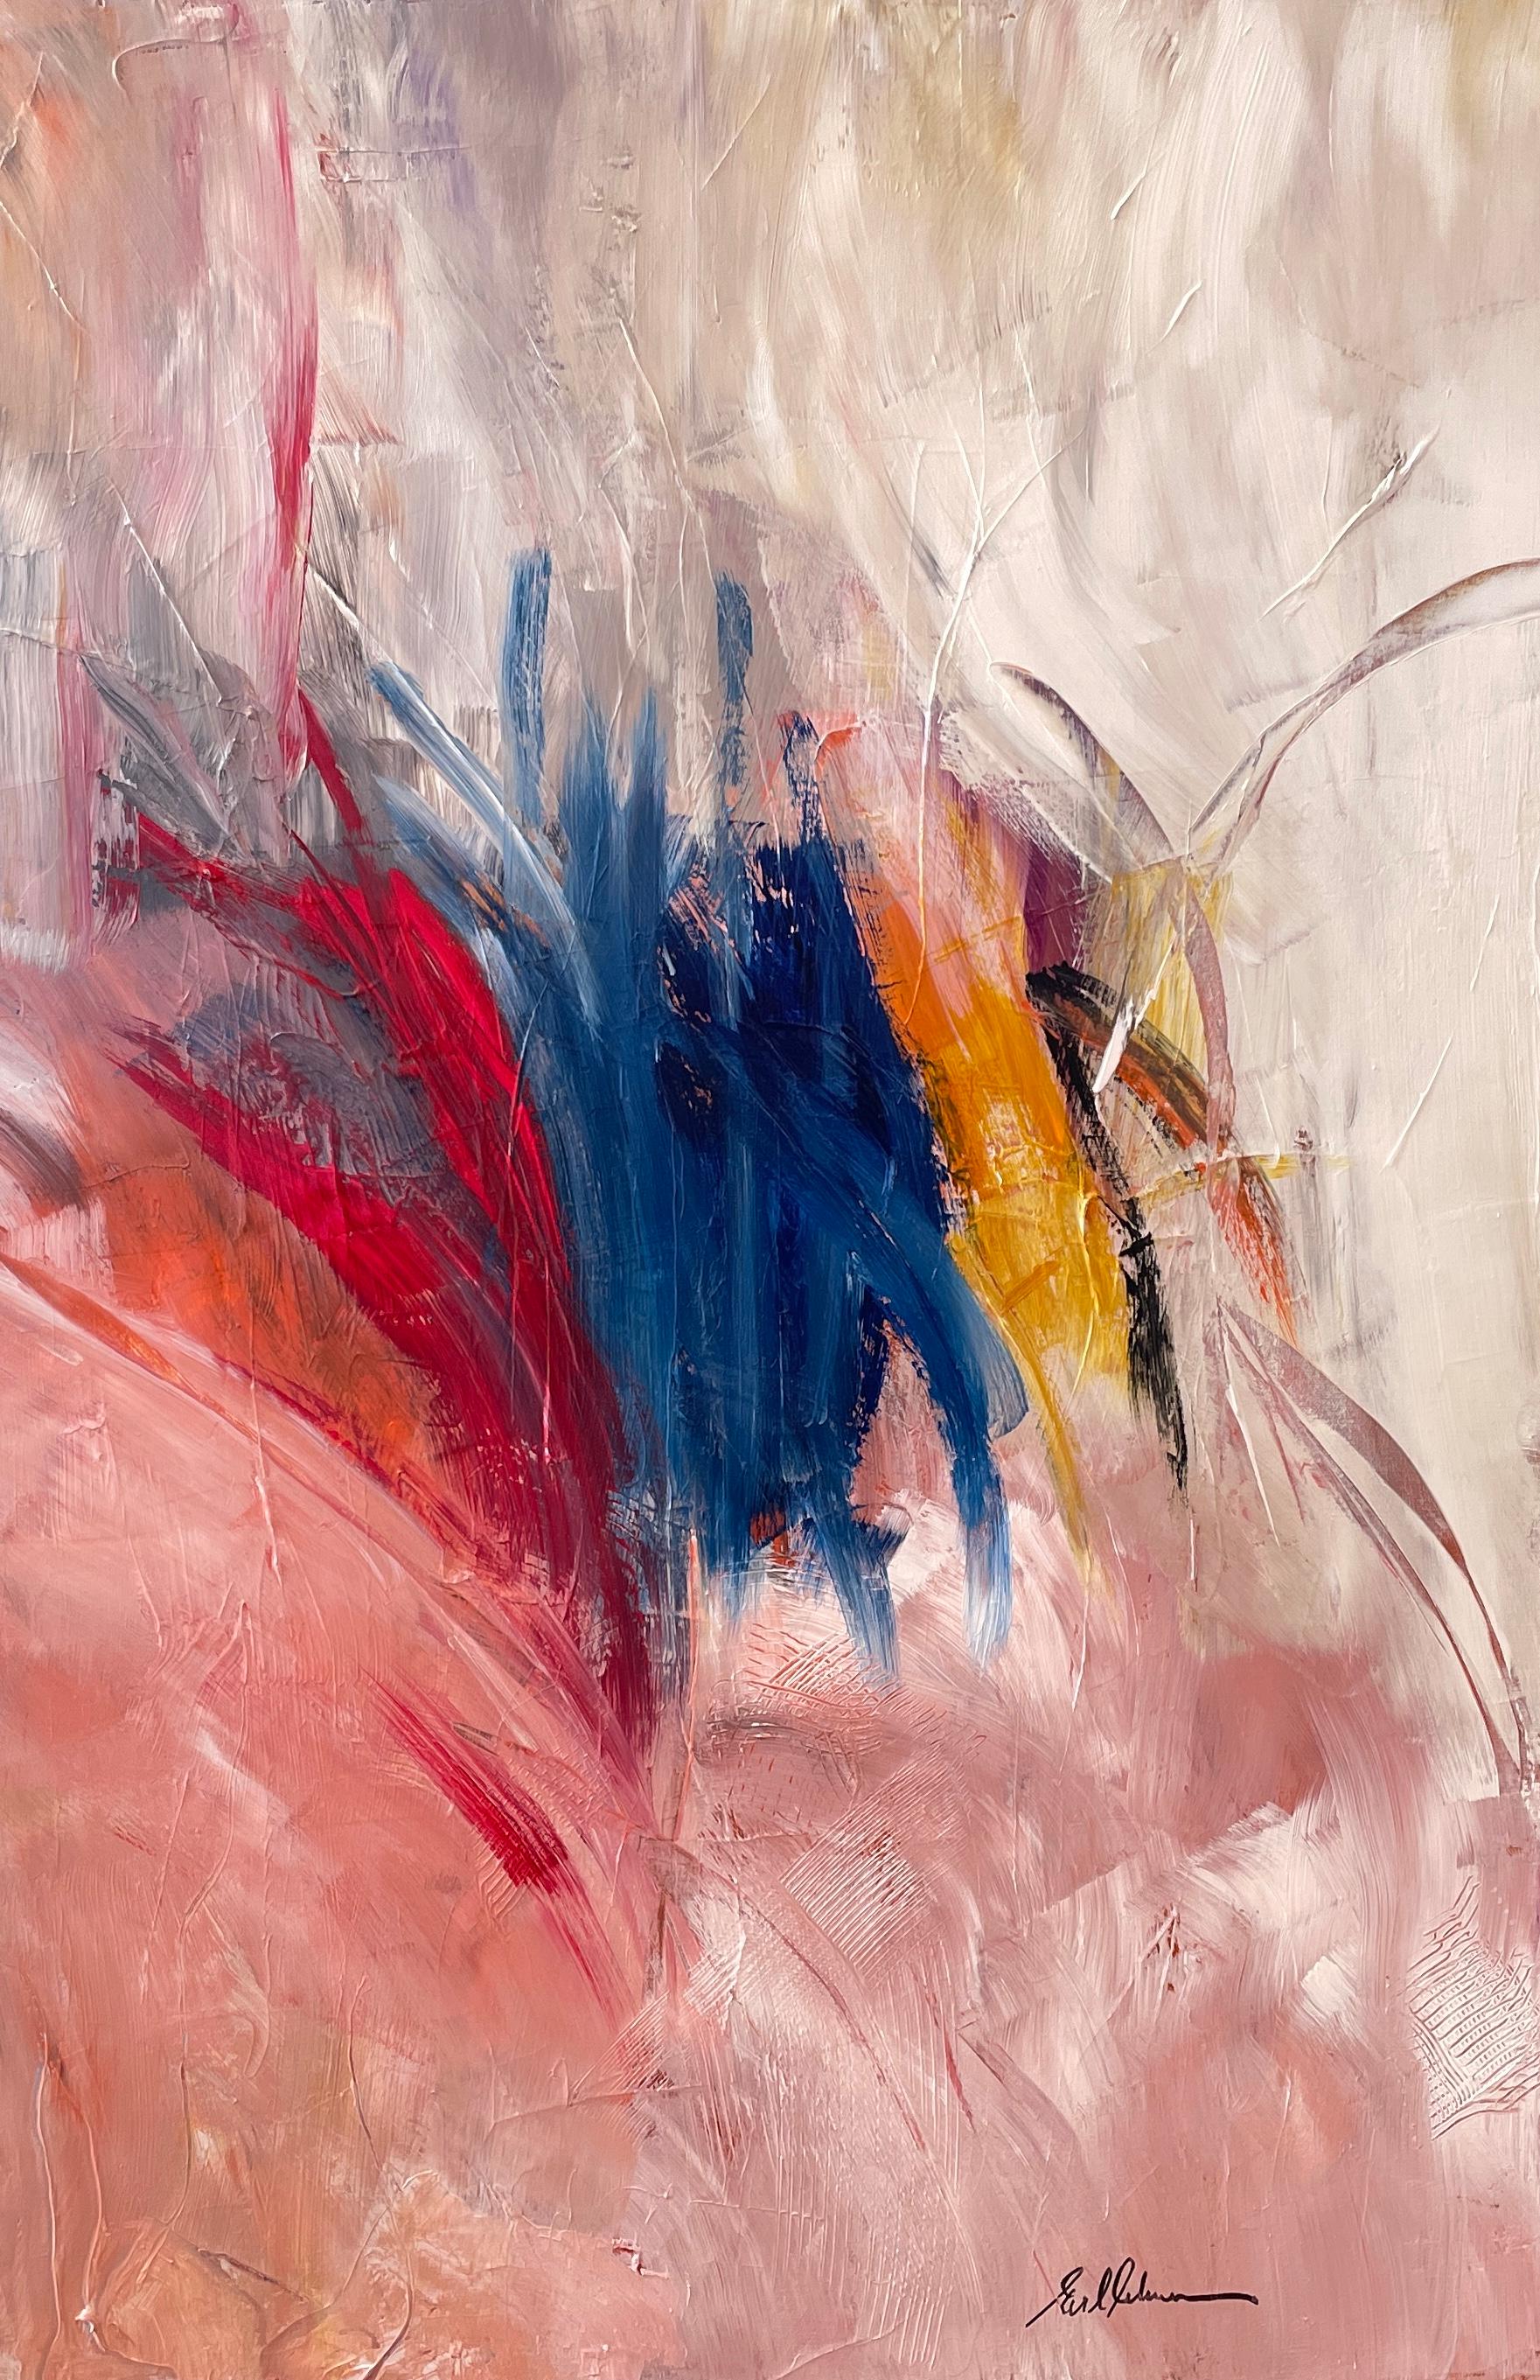 "Dreaming of Spring" Red, Blue, and Orange Contemporary Abstract Expressionist - Mixed Media Art by Gail Lehman